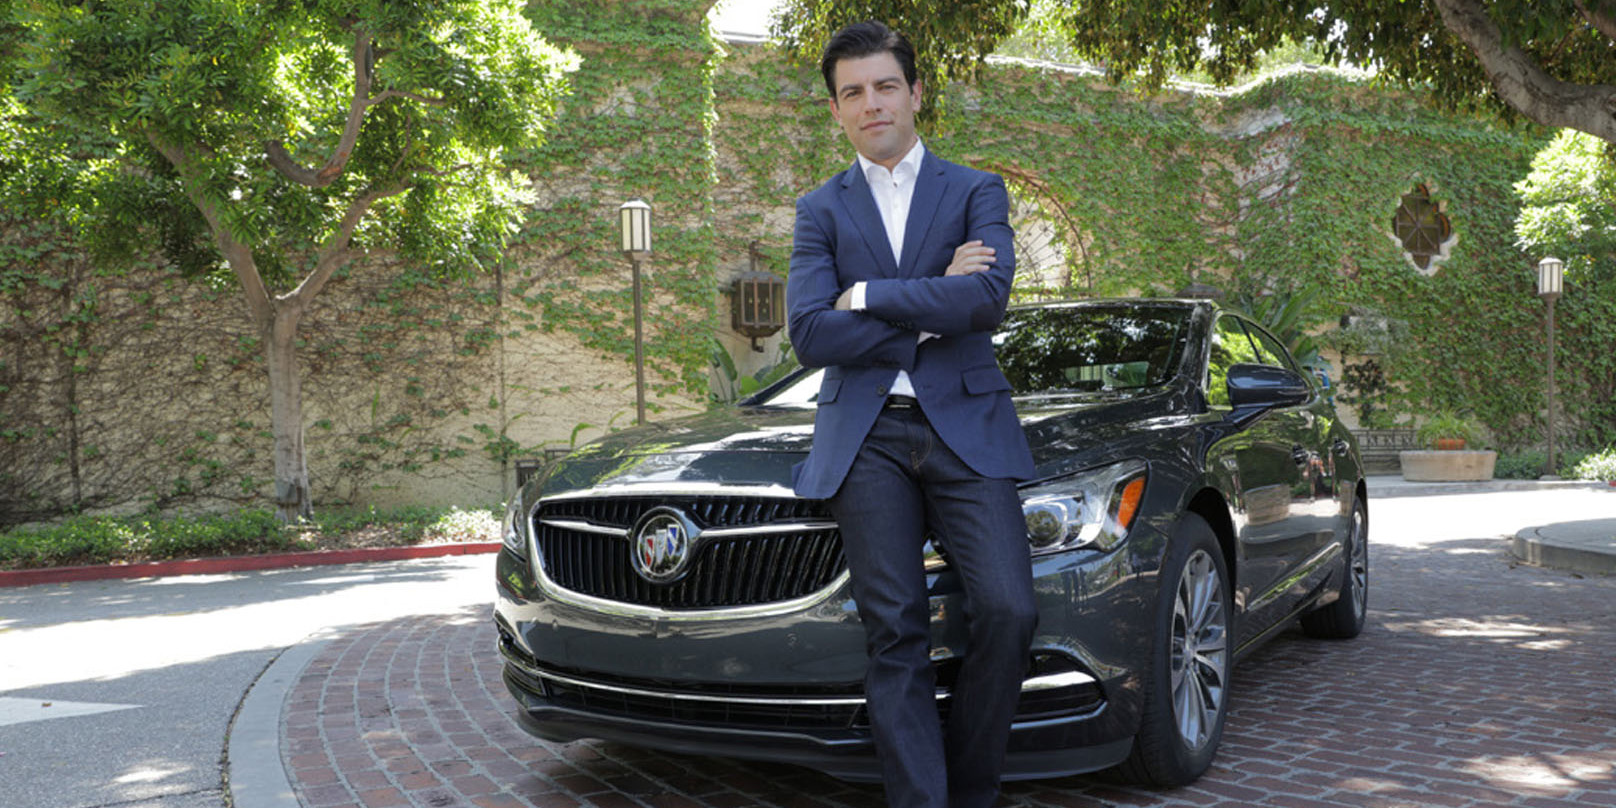 Buick + Max Greenfield